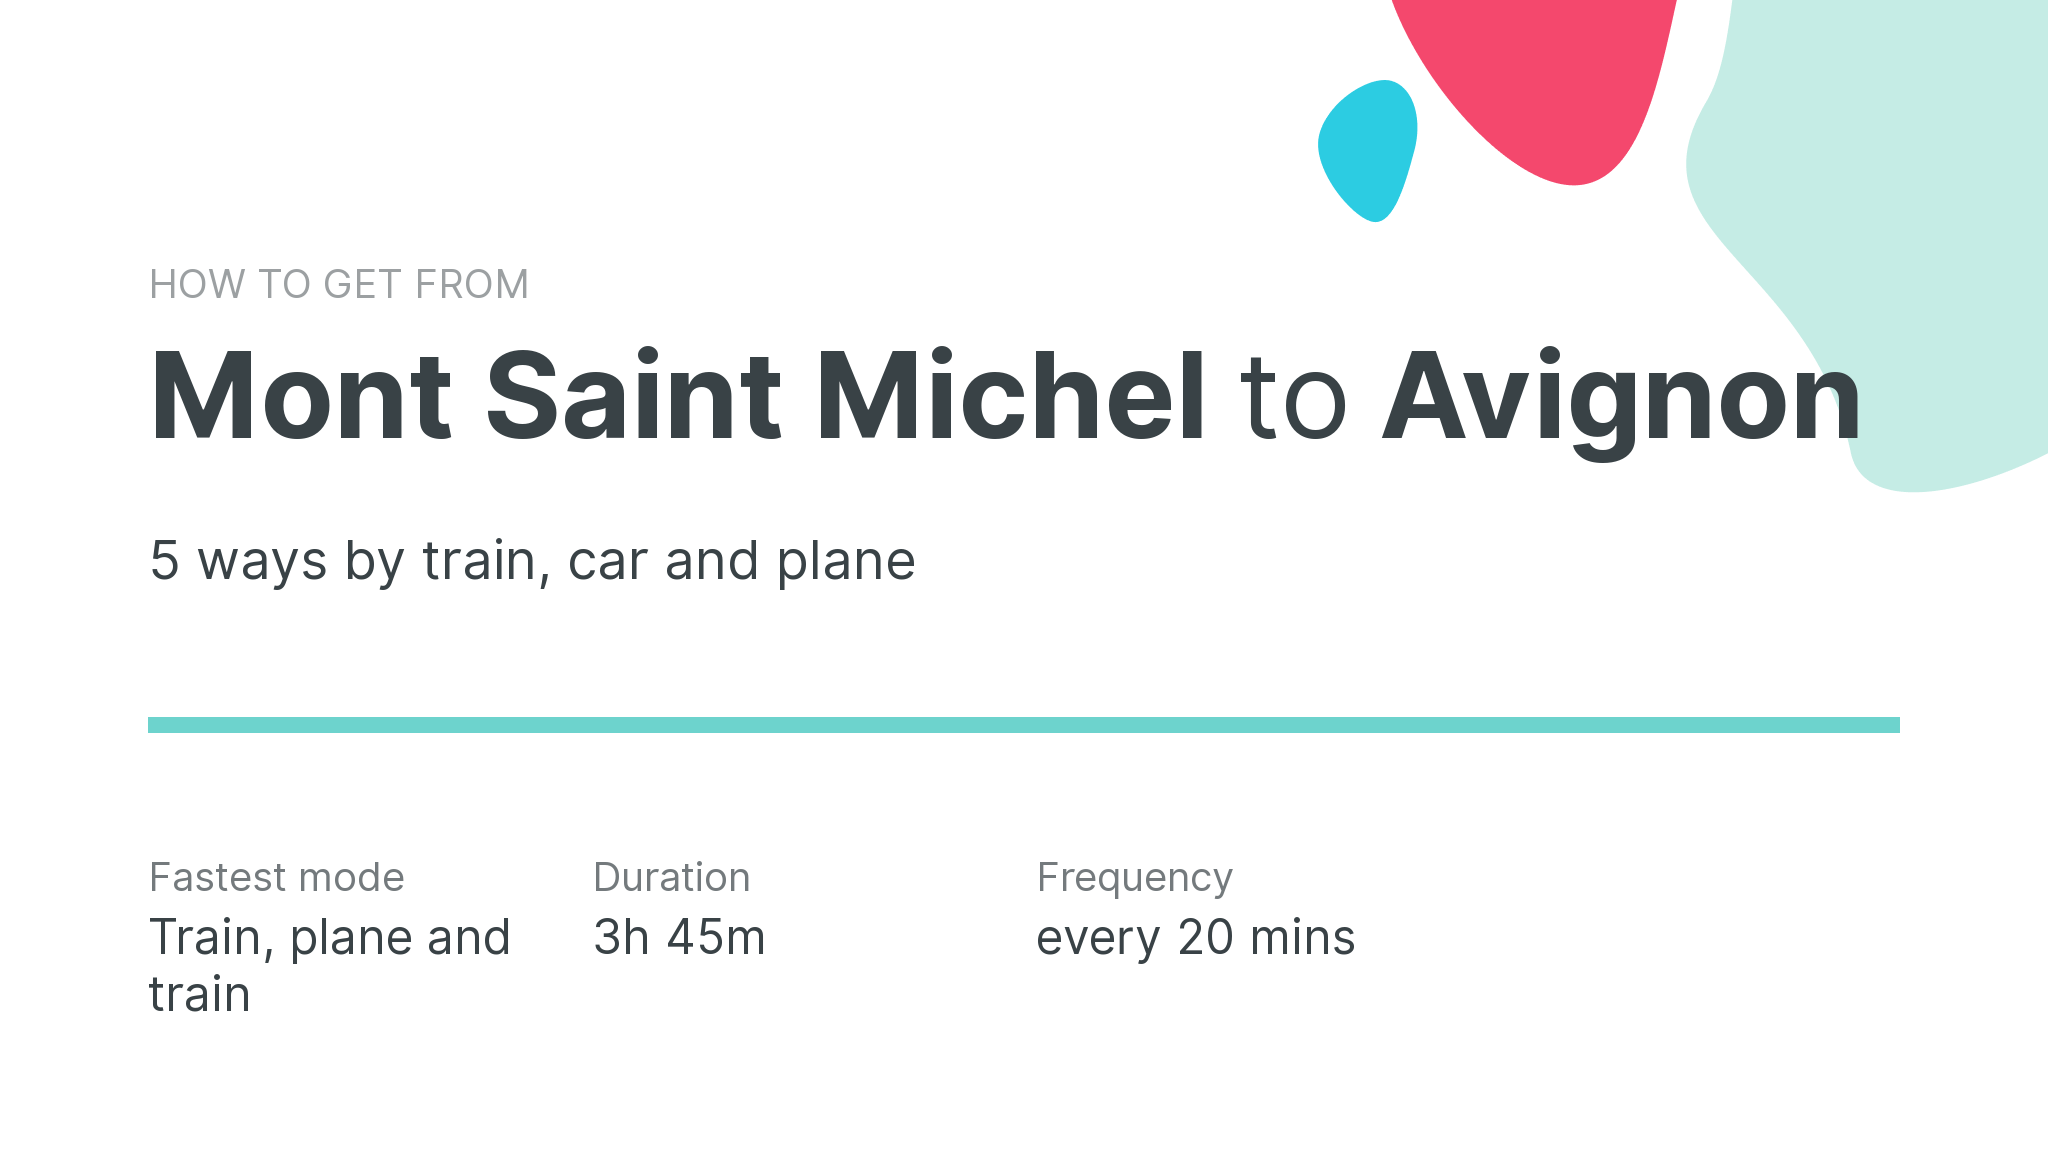 How do I get from Mont Saint Michel to Avignon